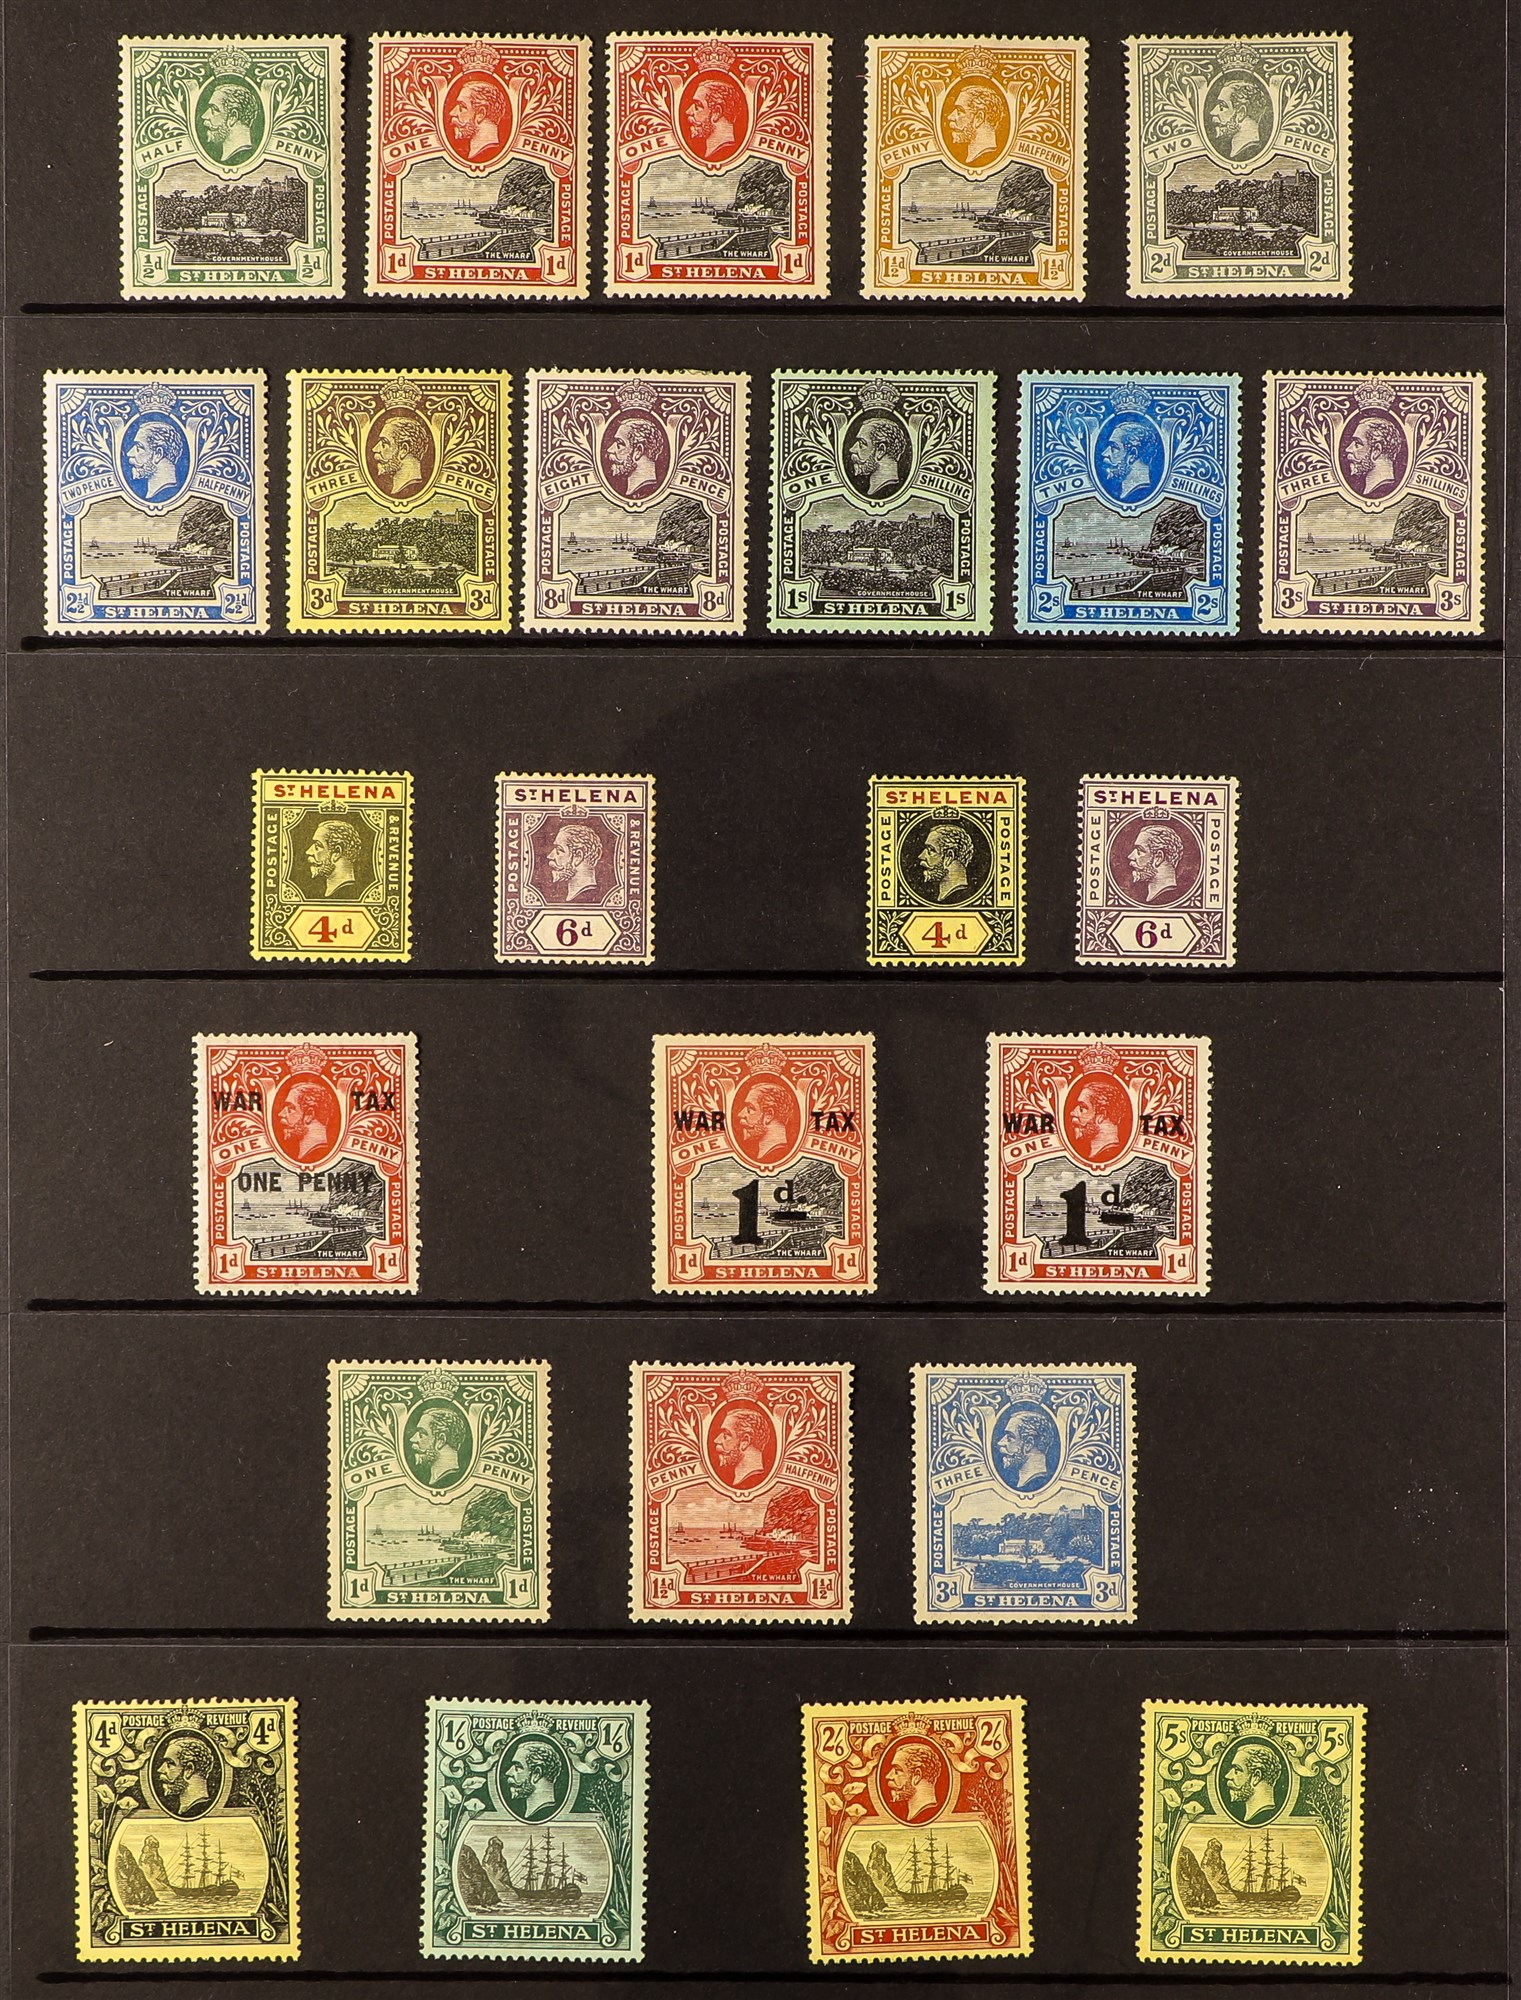 ST HELENA 1912 - 1935 MINT COLLECTION of over 50 stamps on protective pages, note 1912-16 set,